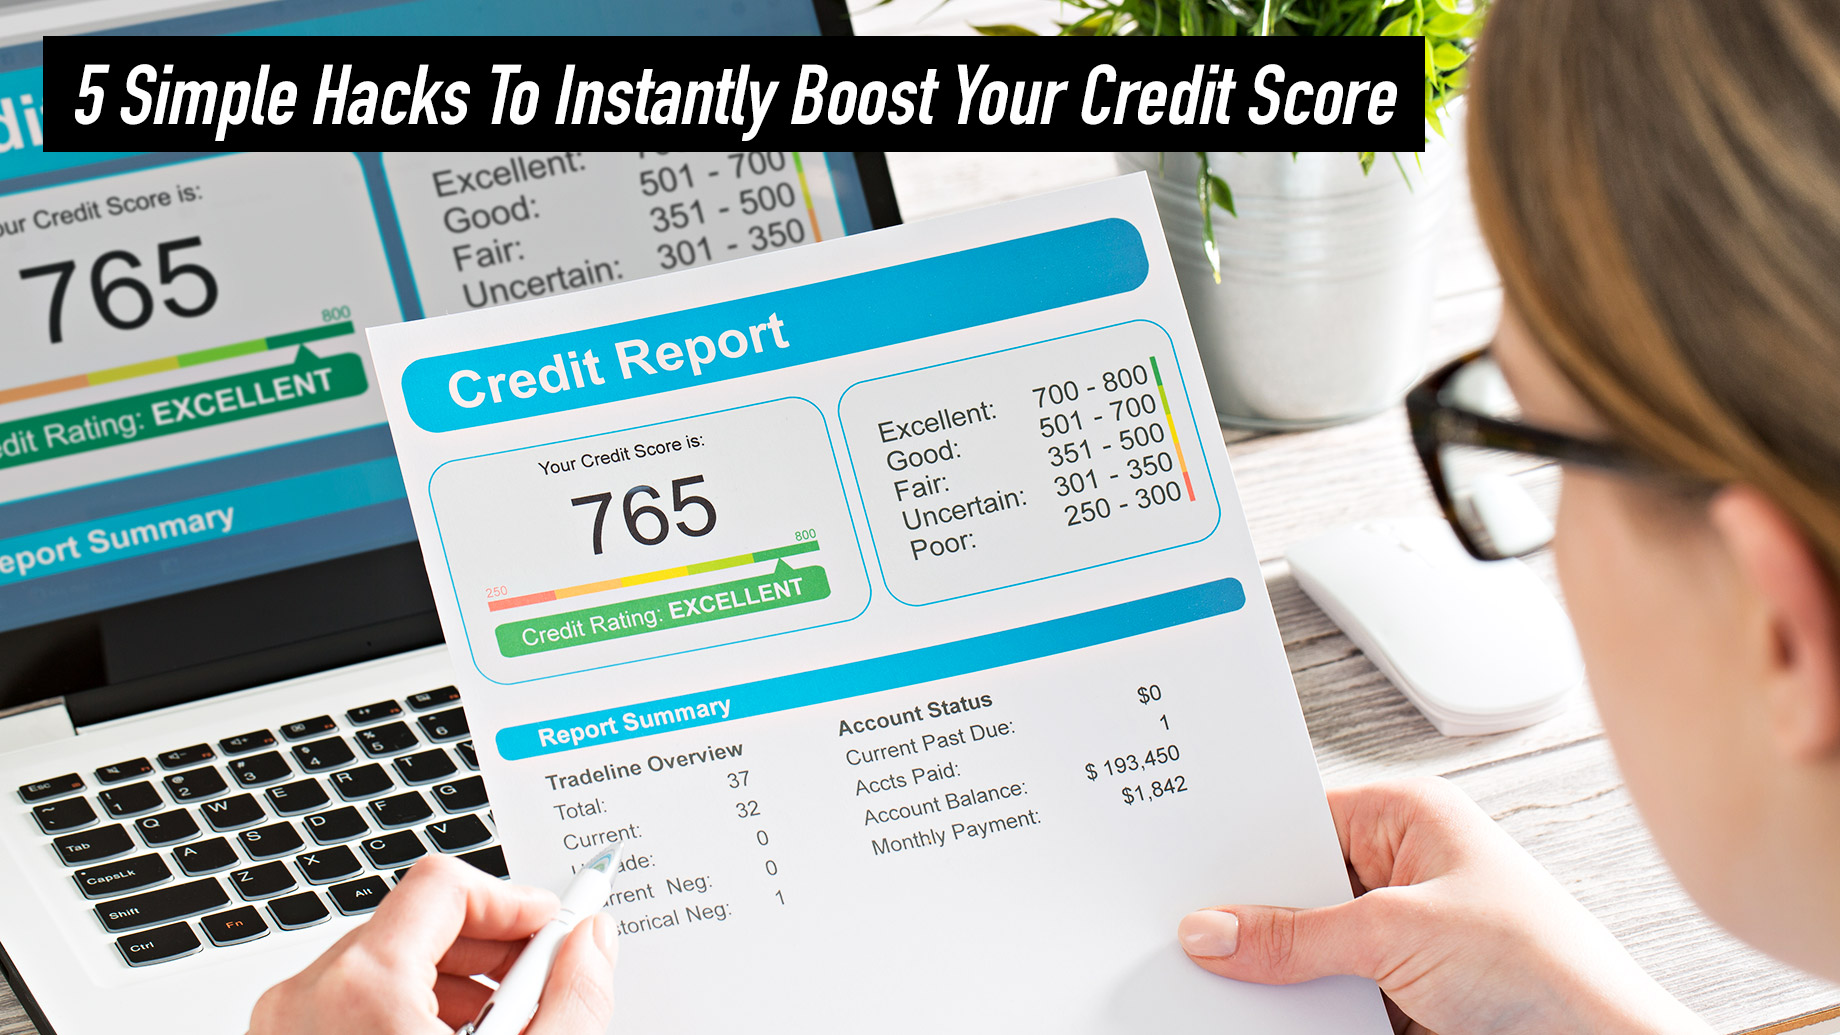 5 Simple Hacks To Instantly Boost Your Credit Score